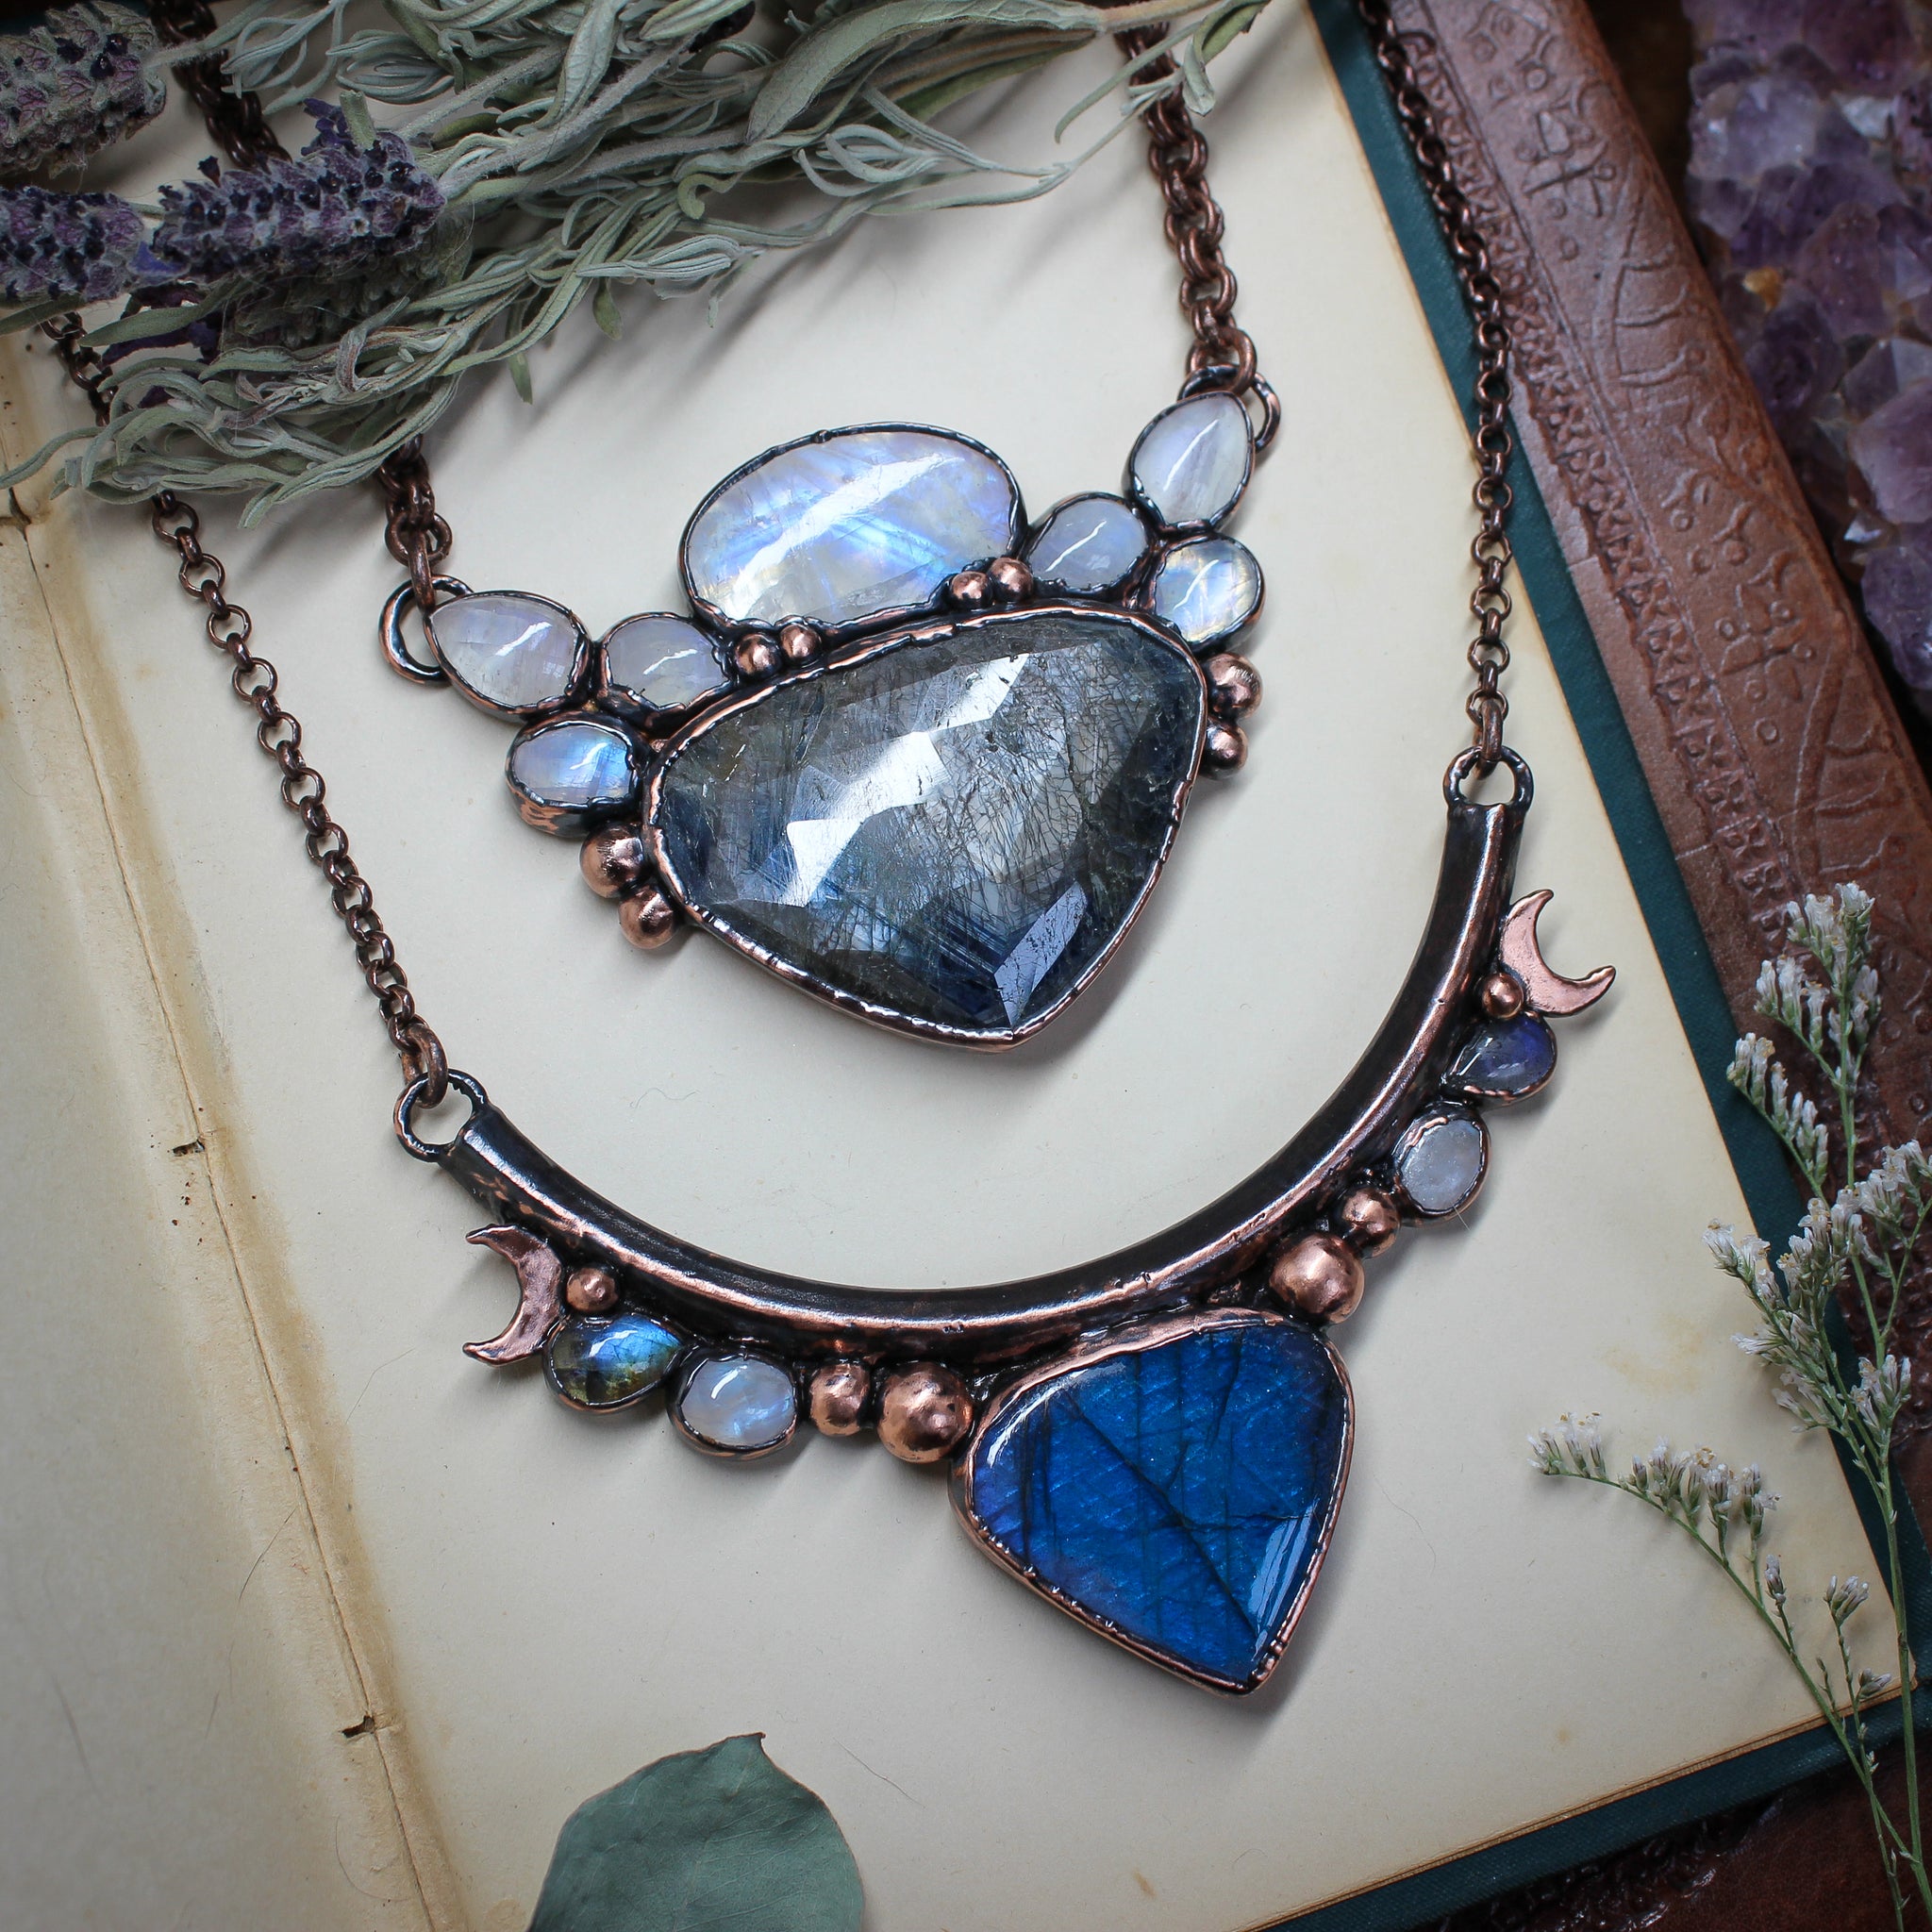 two fantasy style crystal necklaces. One of the necklaces has sapphires, the other has blue labradorite